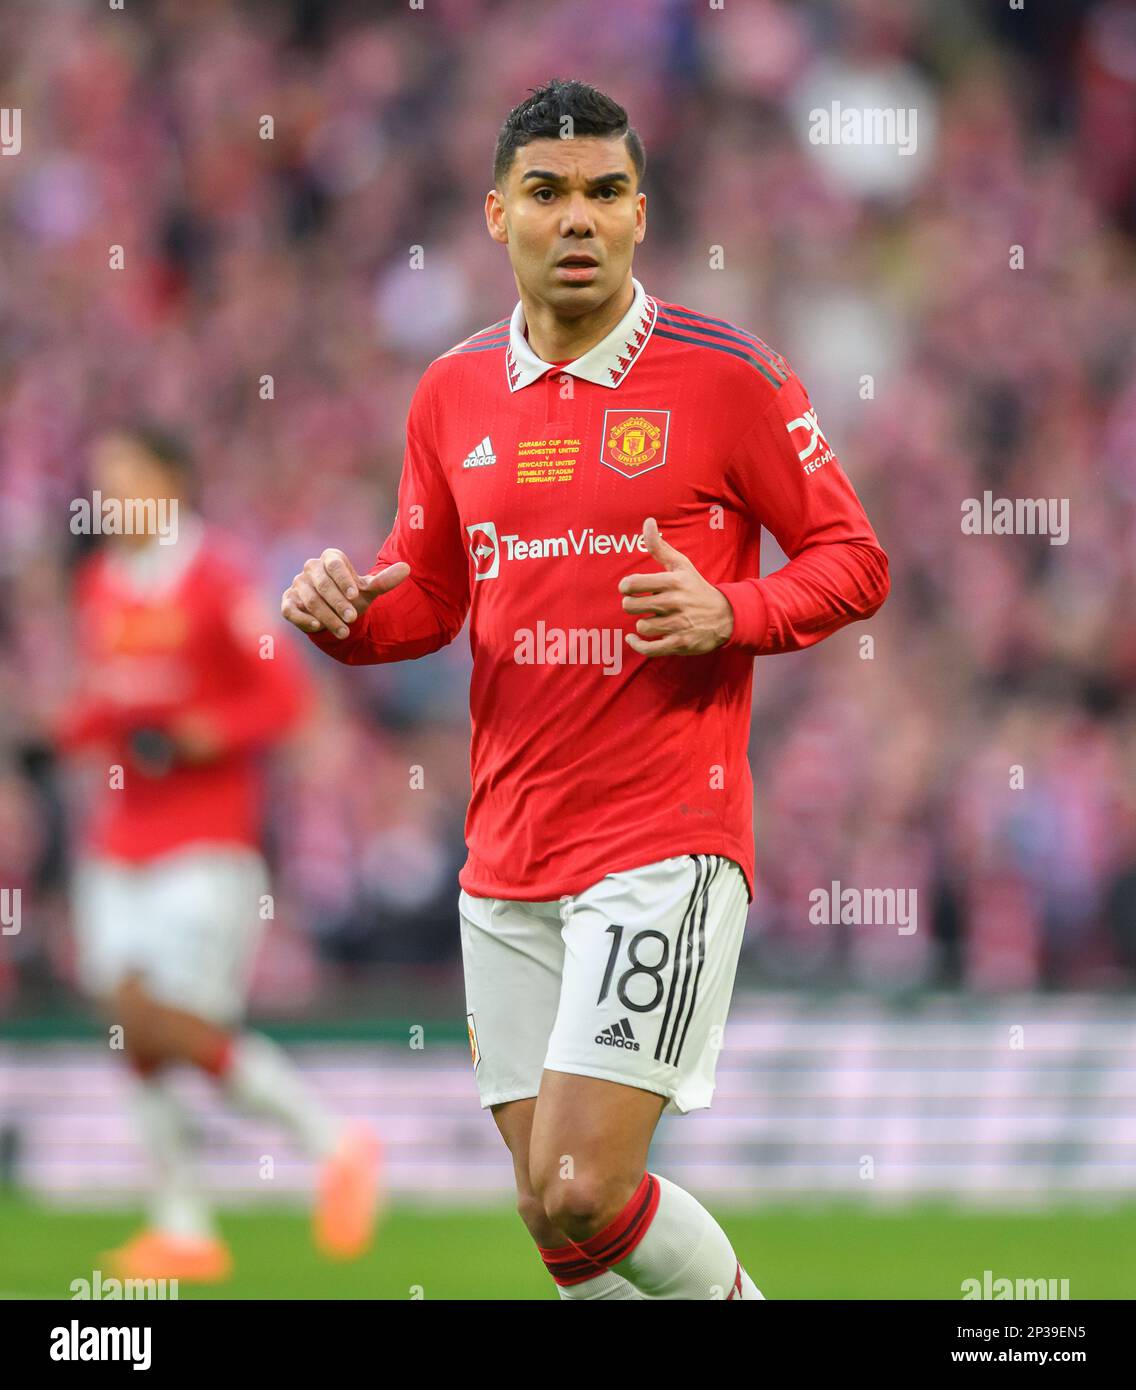 26 Feb 2023 - Manchester United v Newcastle United - Carabao Cup - Final - Wembley Stadium Manchester Uniteds Casemiro during the Carabao Cup Final